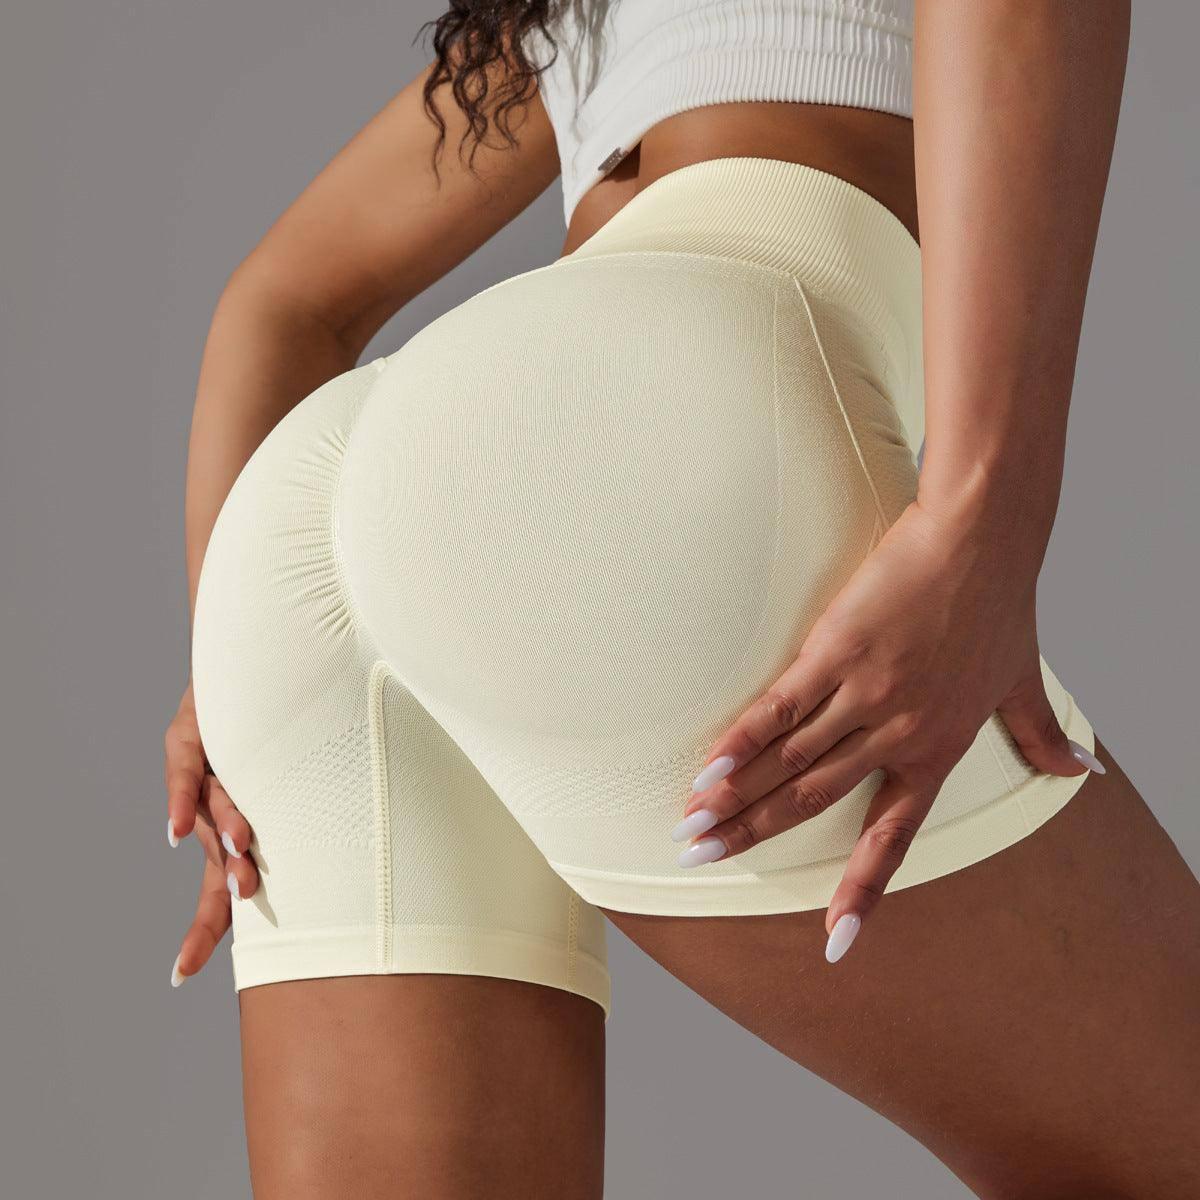 Seamless Tight Belly Trimming Hip High Elasticity Yoga-6611 Shorts Milky White-14